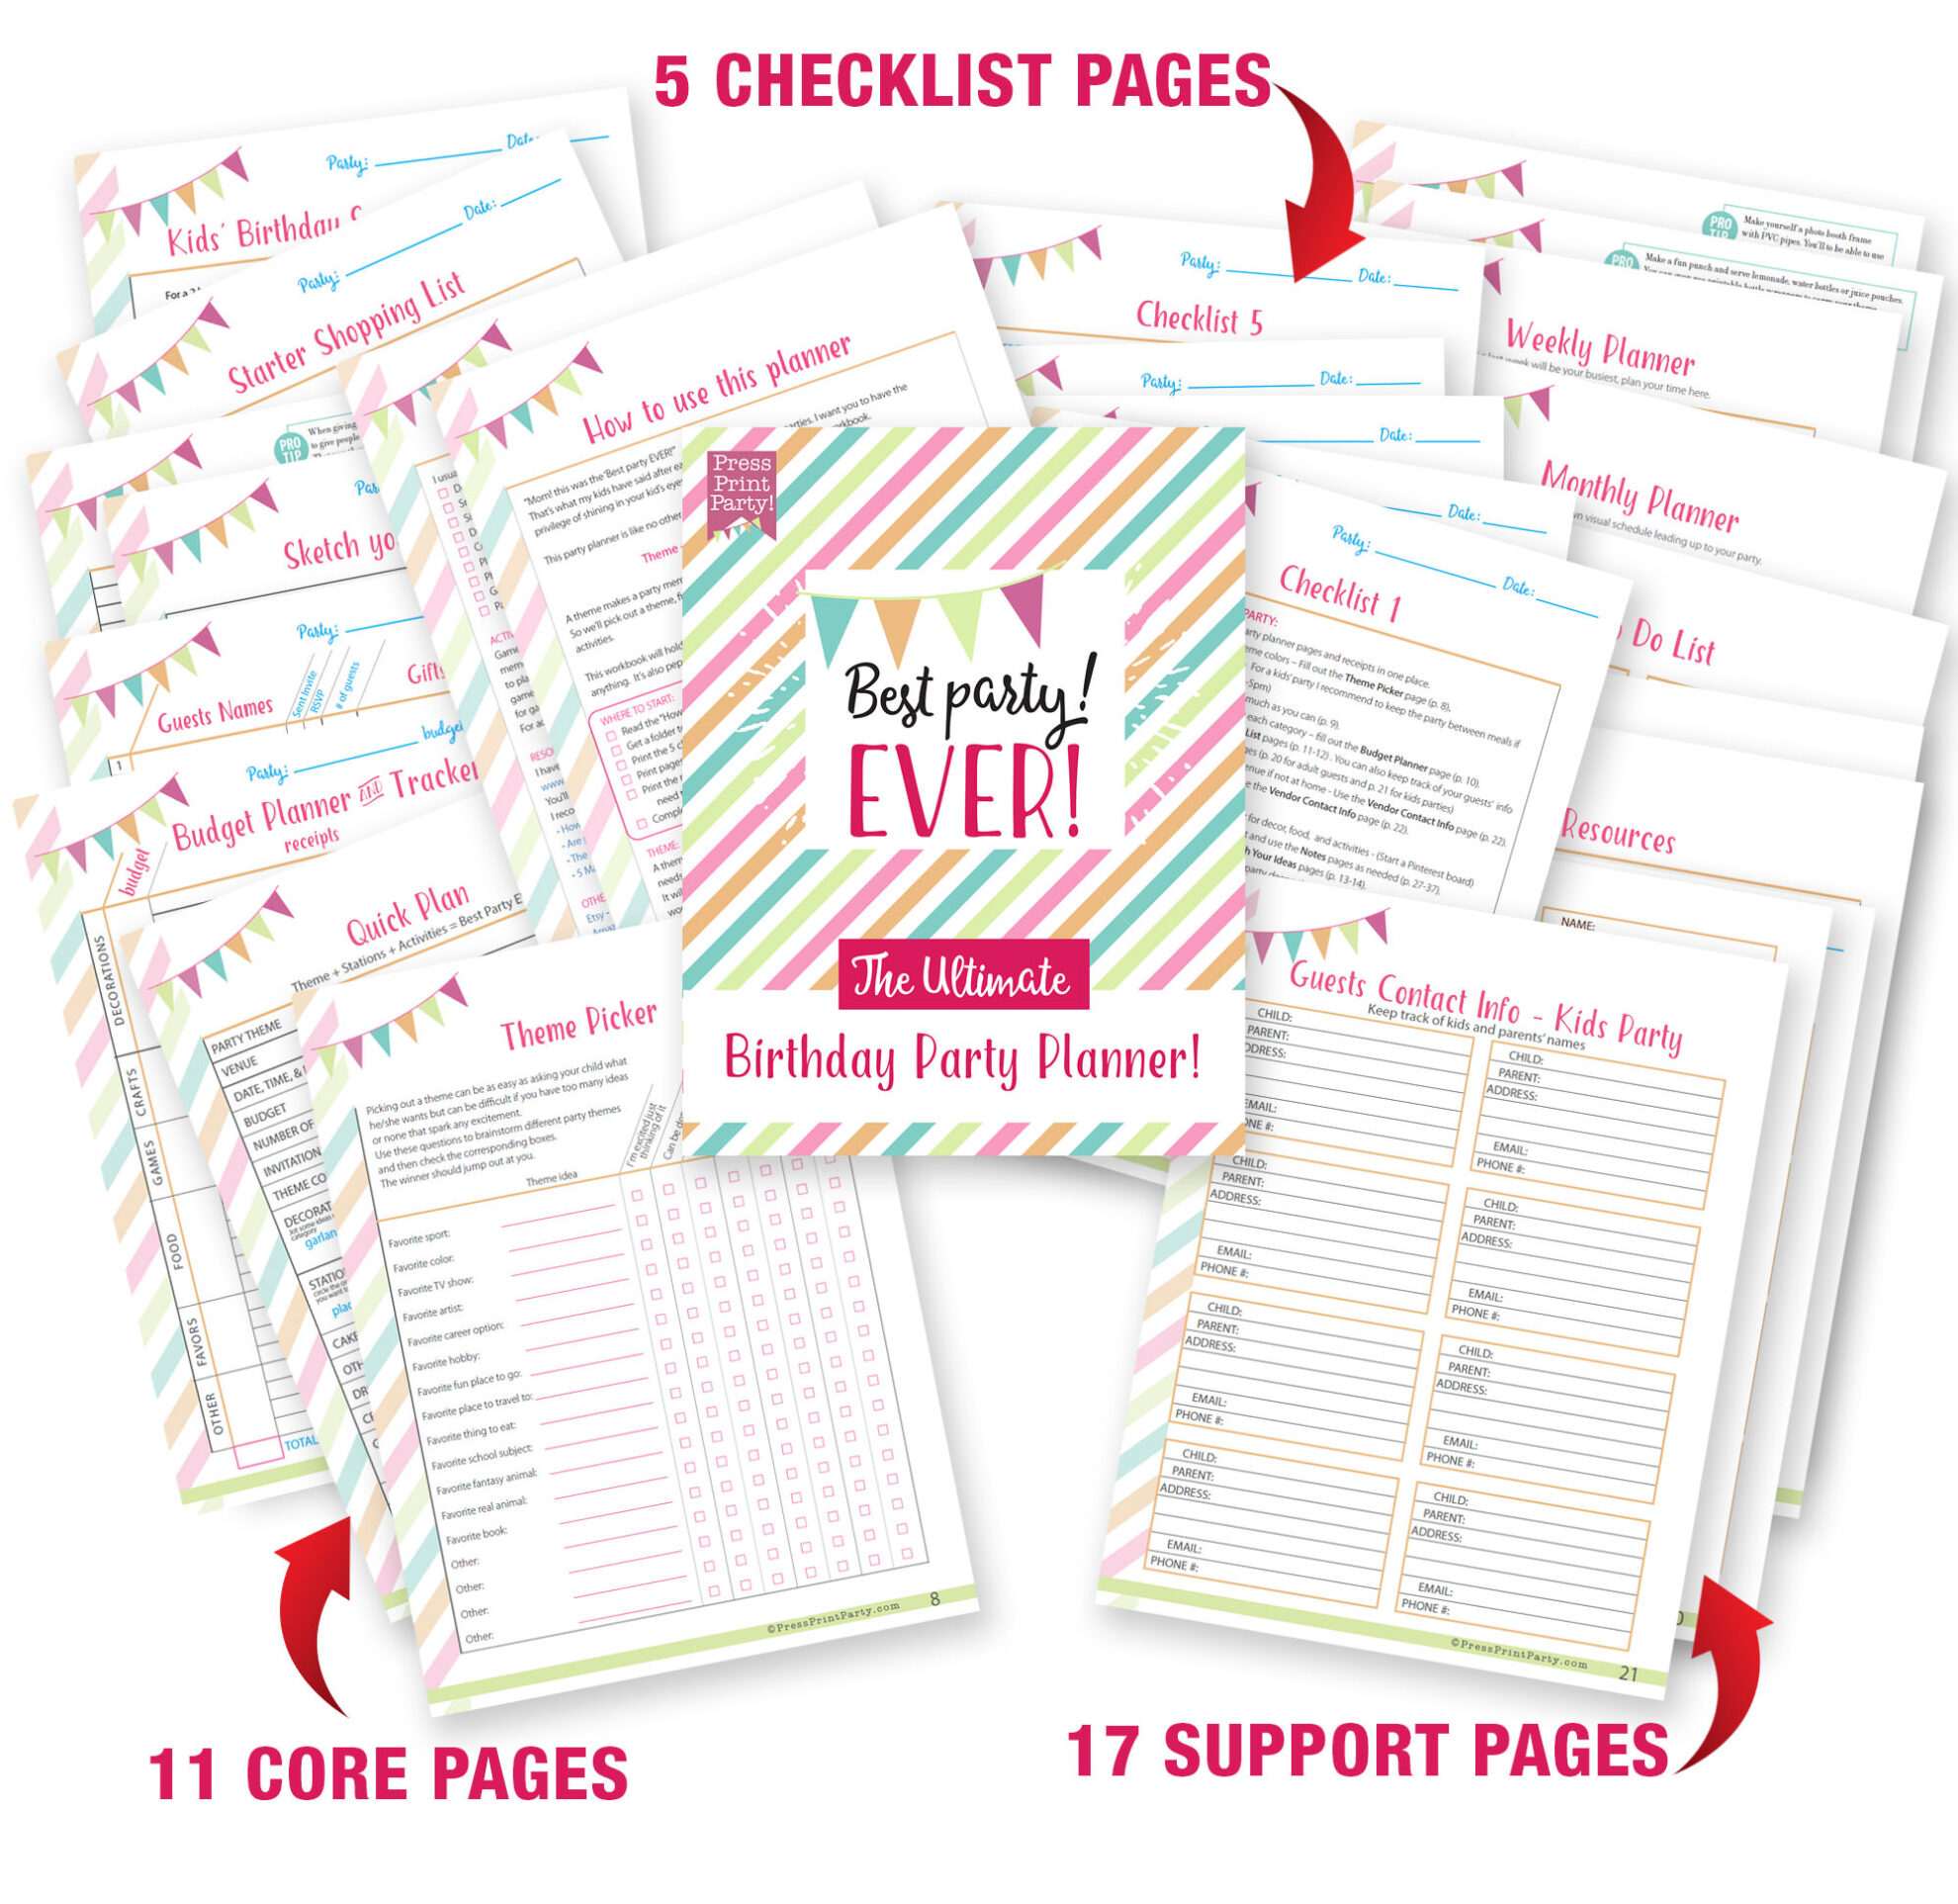 Best Party Ever the Ultimate Birthday Party Planner Press Print Party! Instant download pdf all the pages shown 5 birthday party checklist, 11 core pages, 12 support pages.